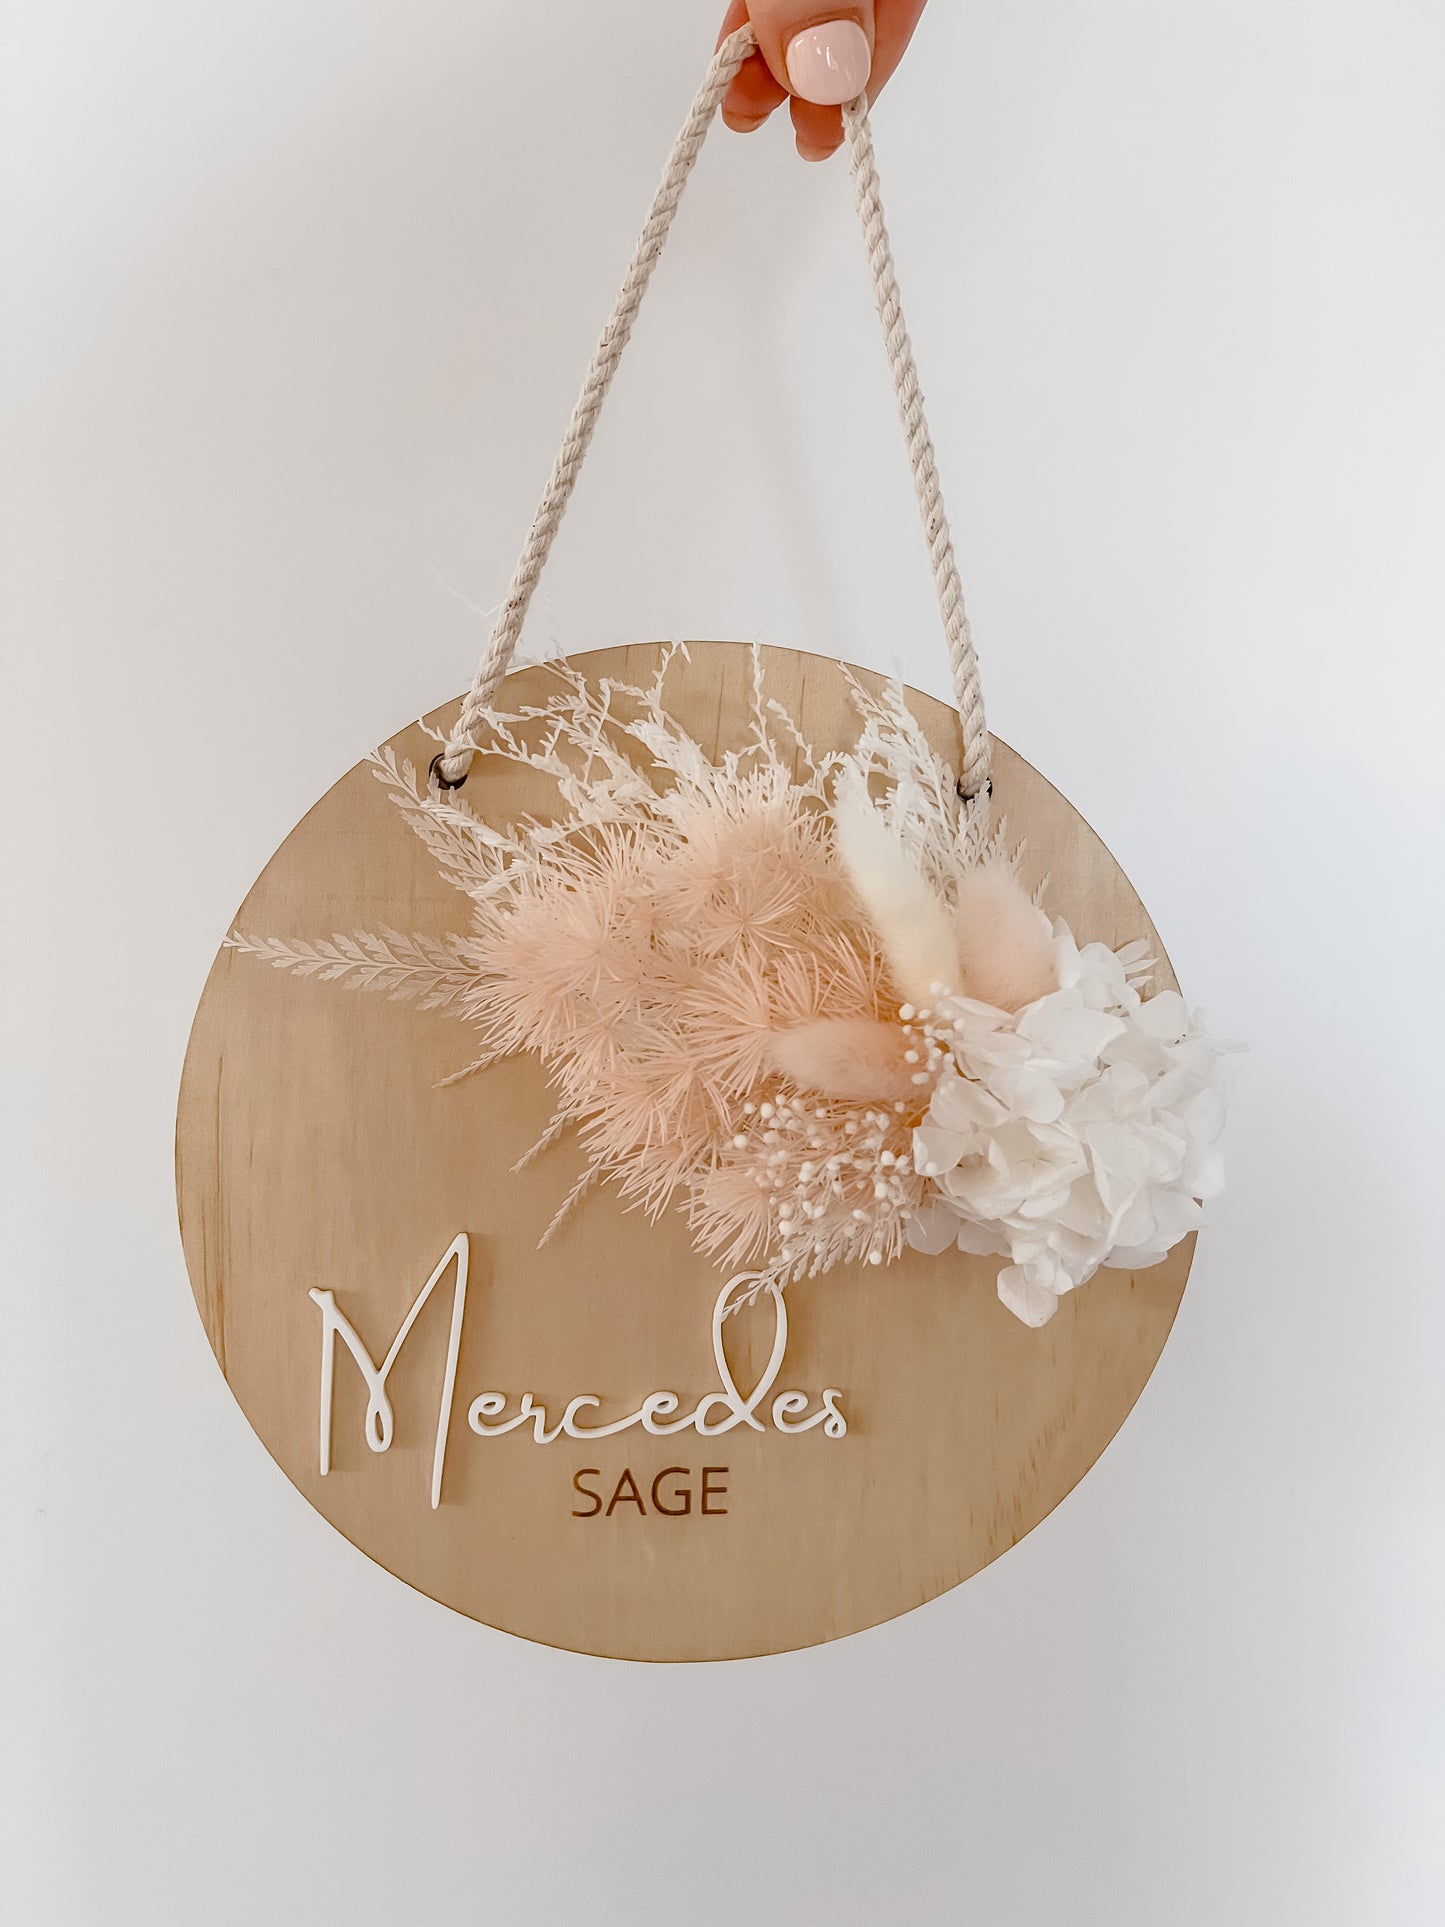 Wooden Name Hanging Plaque w/ mini Dried Flowers